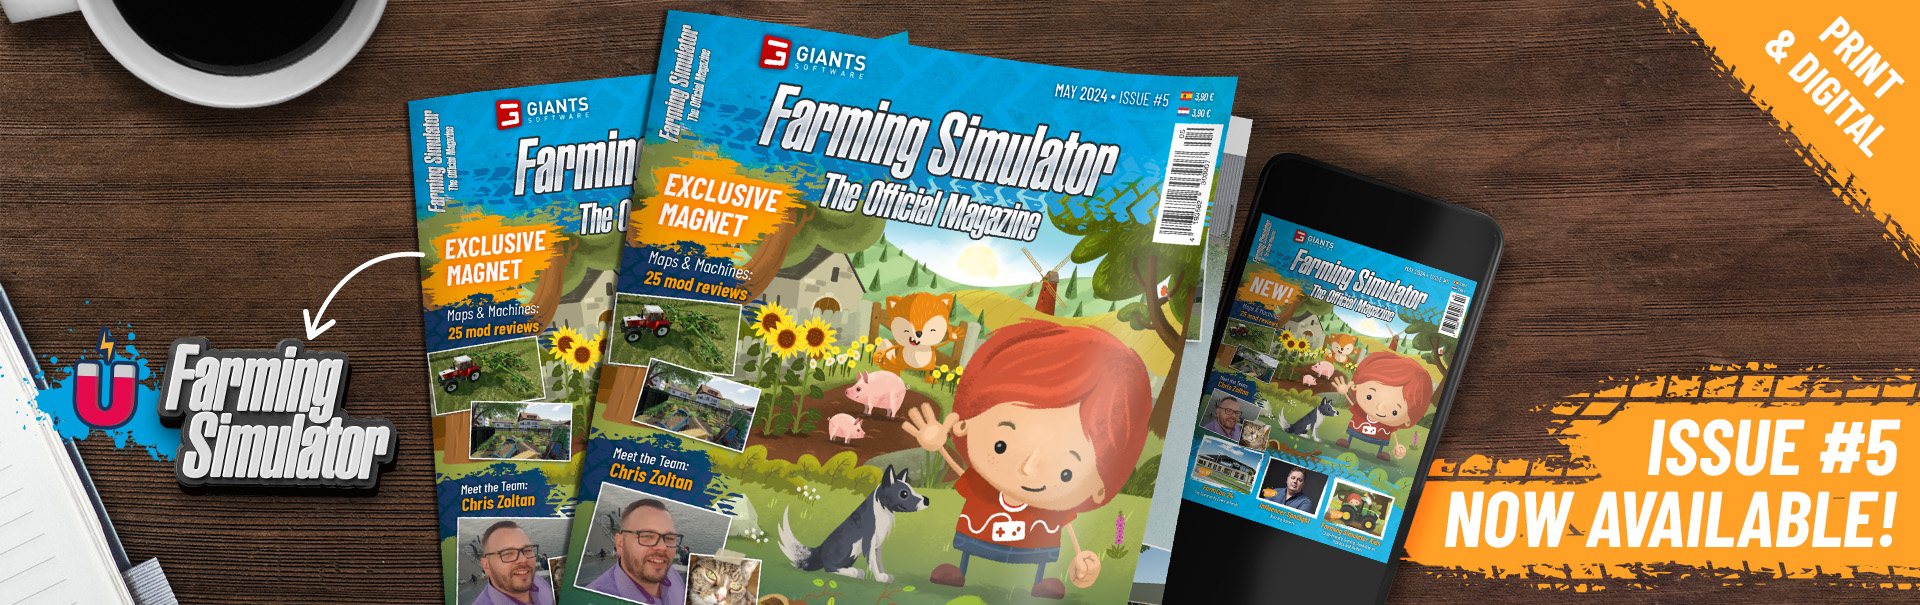 Faming Simulator Magazine Issue 5: Out now!